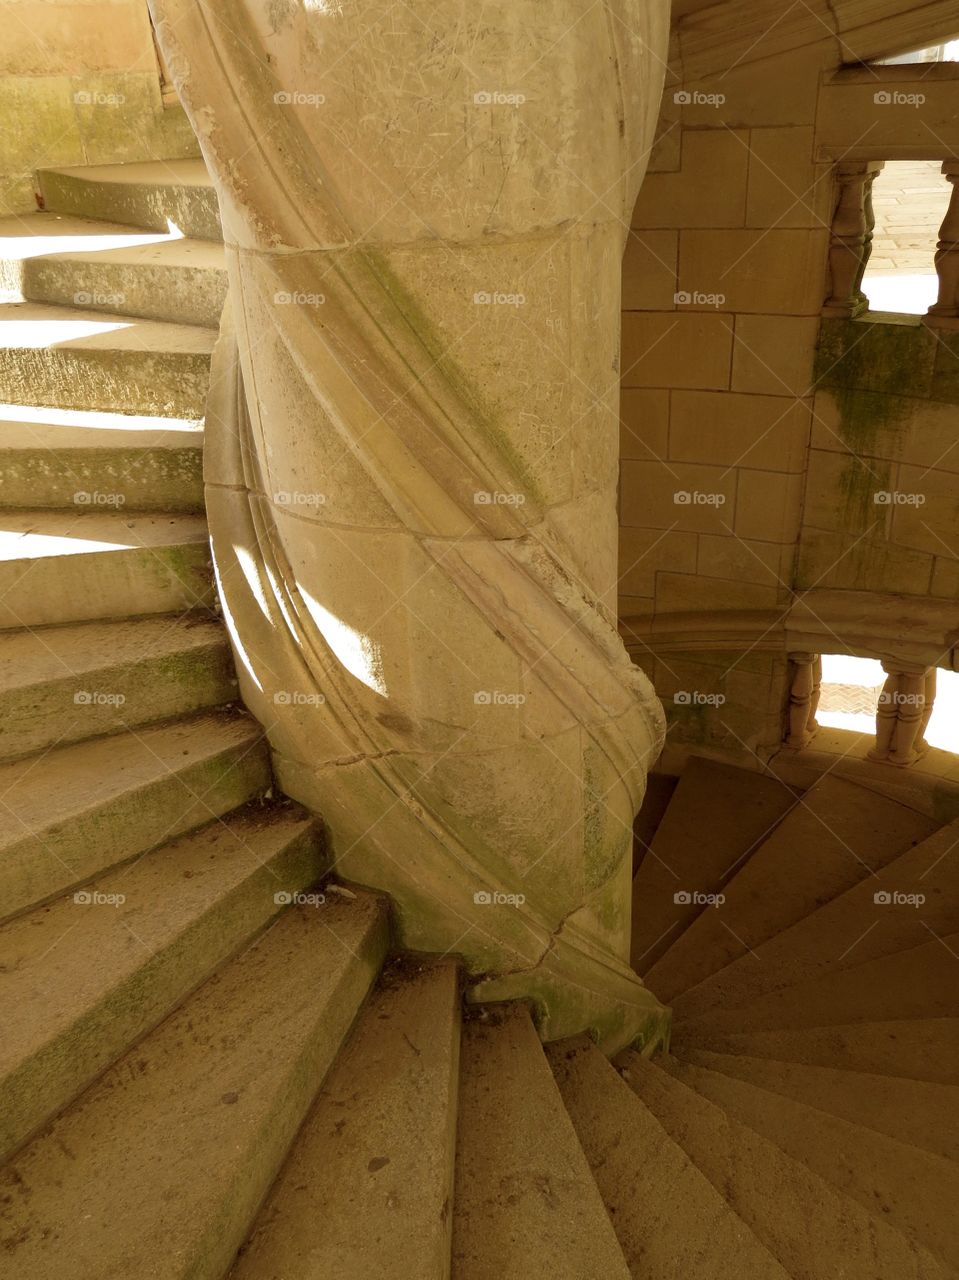 Chateaux Chambord stairwell